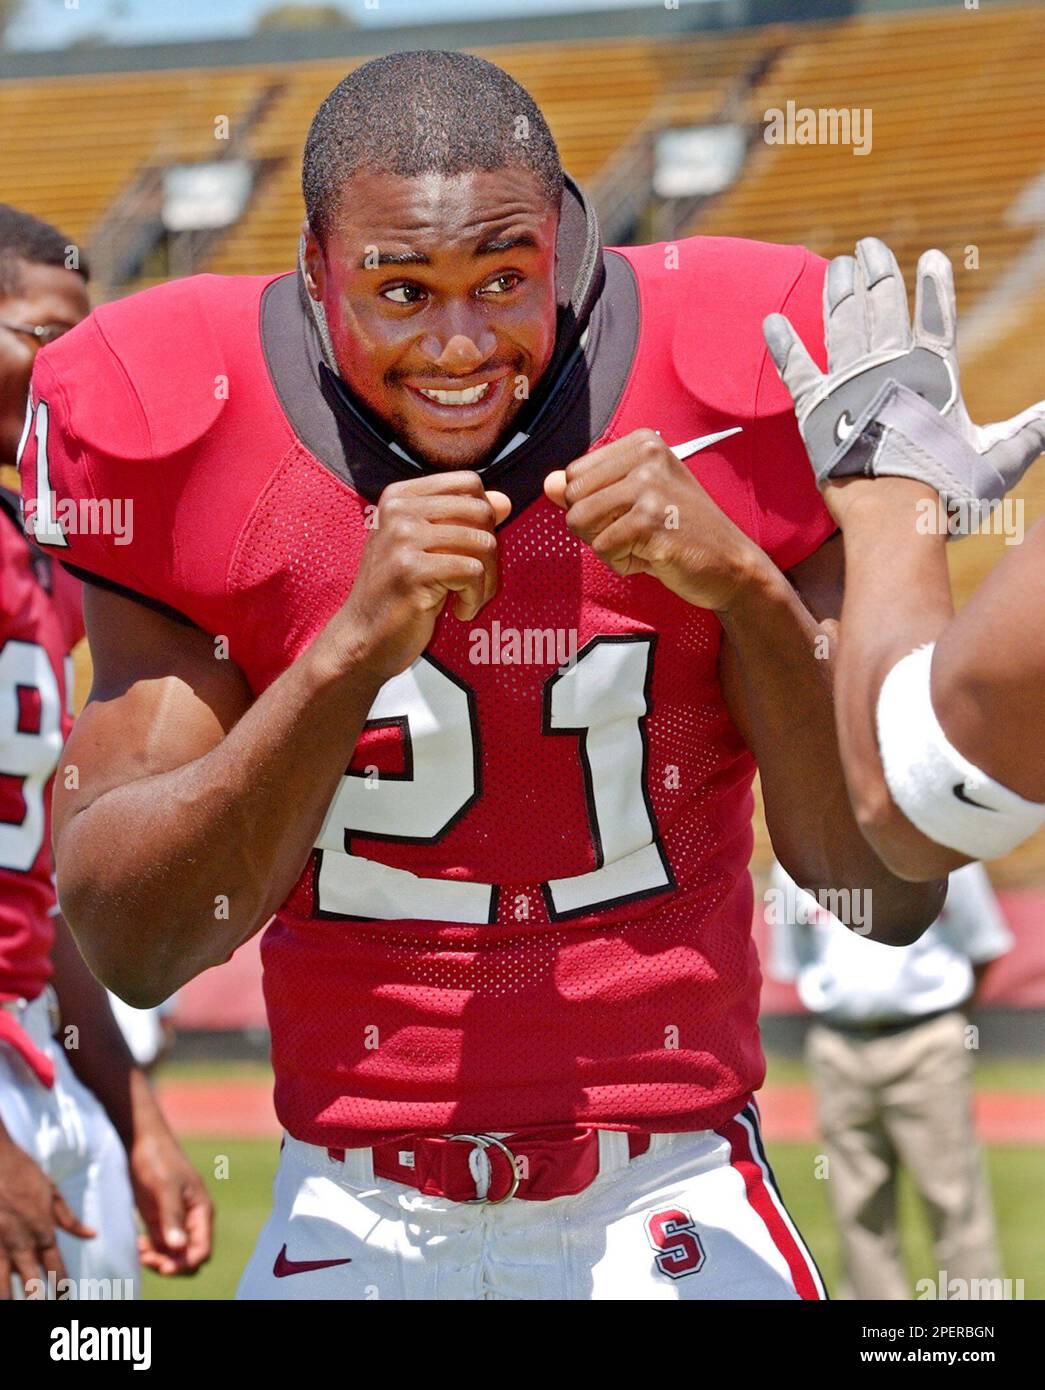 Stanford free safety Oshiomogho Atogwe spars with a teammate during  practice in Stanford, Calif., Sunday, Aug. 15, 2004. Atogwe is the team's  leader in tackles the past two seasons. (AP Photo/Paul Sakuma